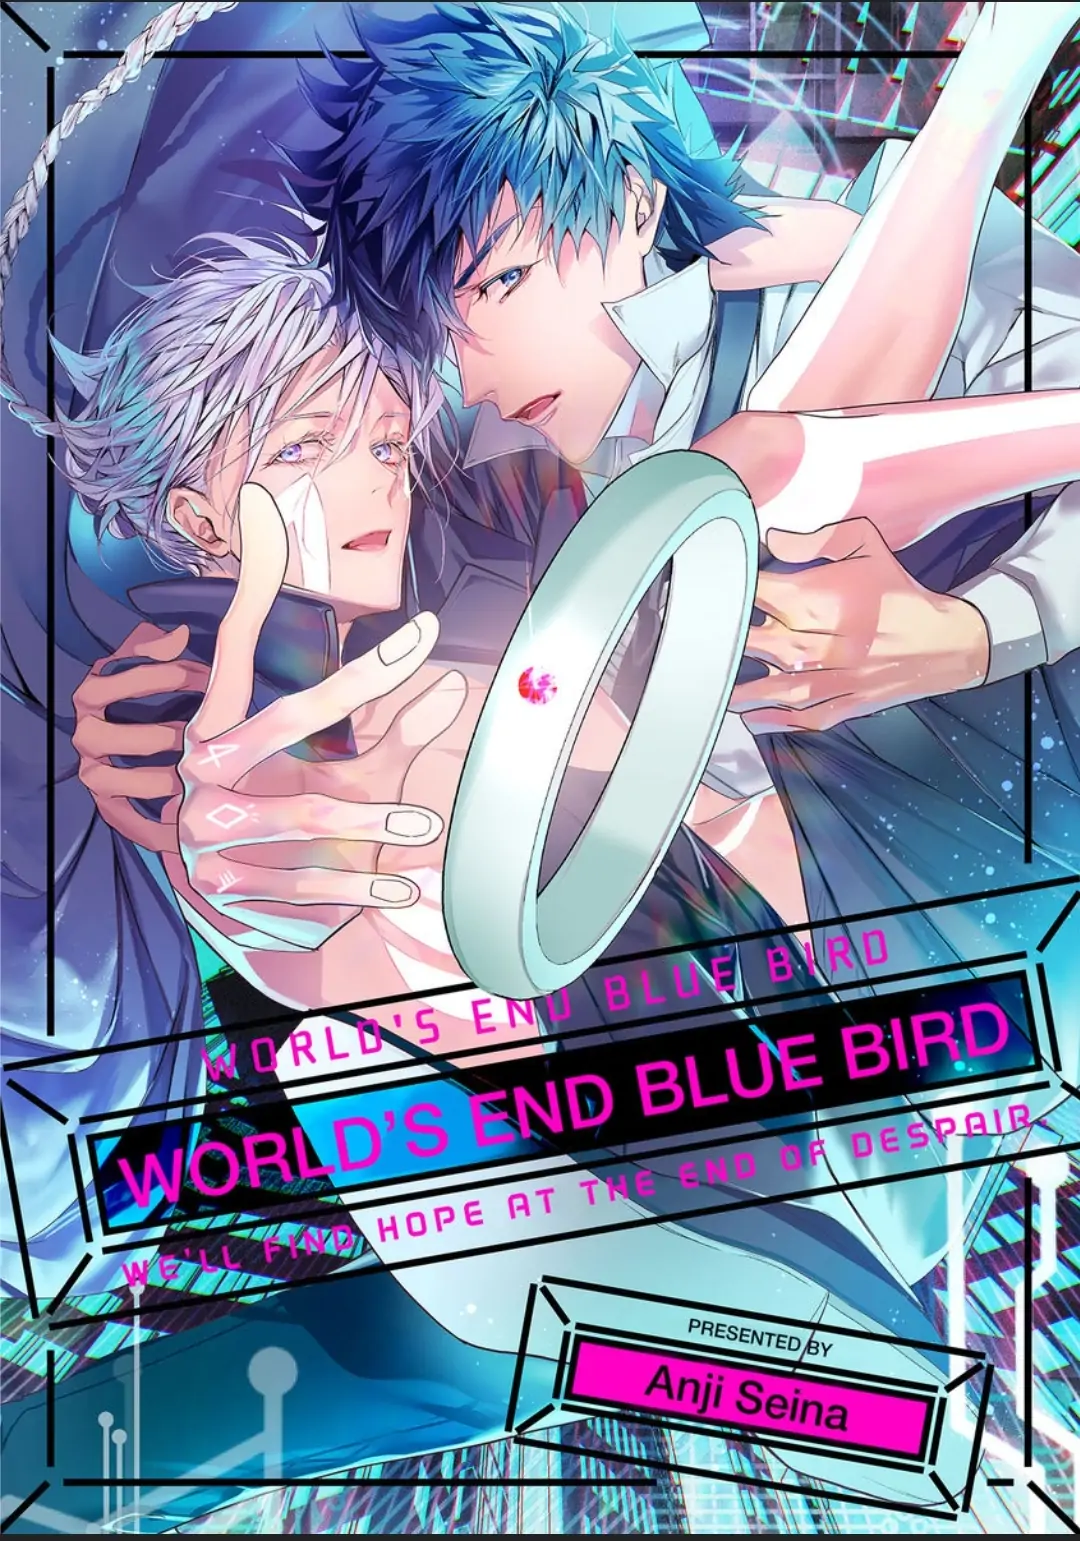 World's End Blue Bird - Page 1